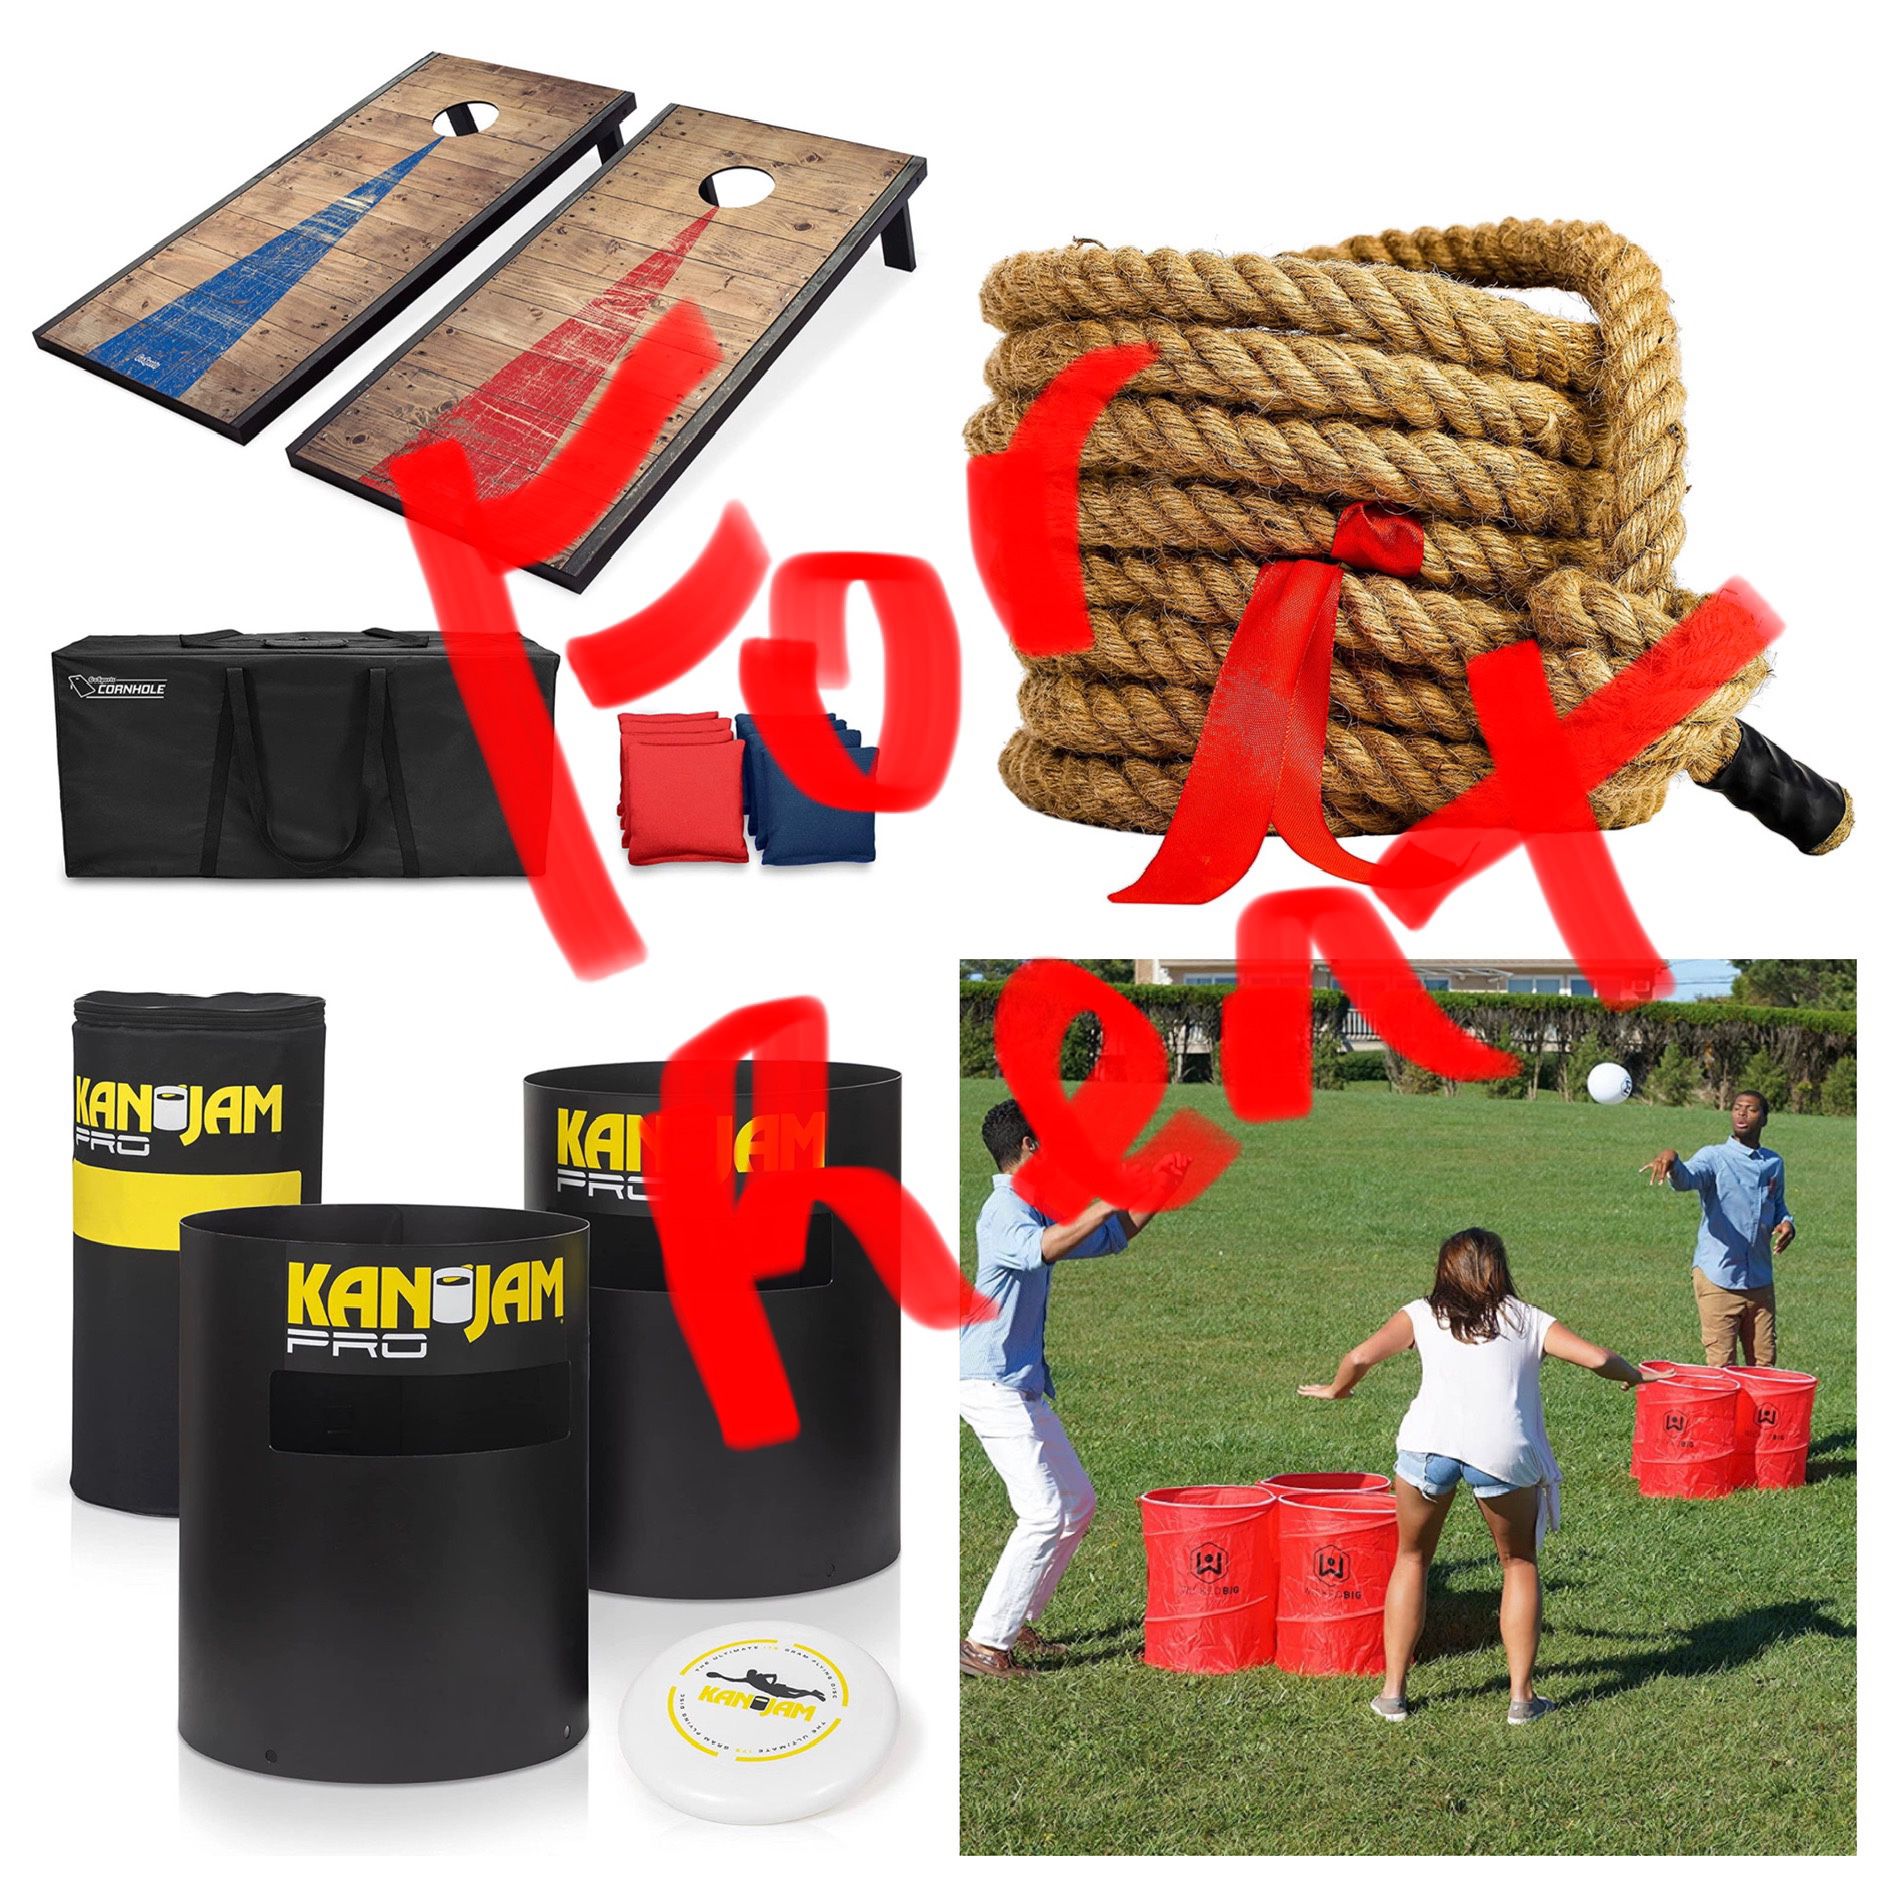 Outdoor Party Games - Cornhole, Beer Pong, Kan Jam, Badminton, and Tug Of War Rope